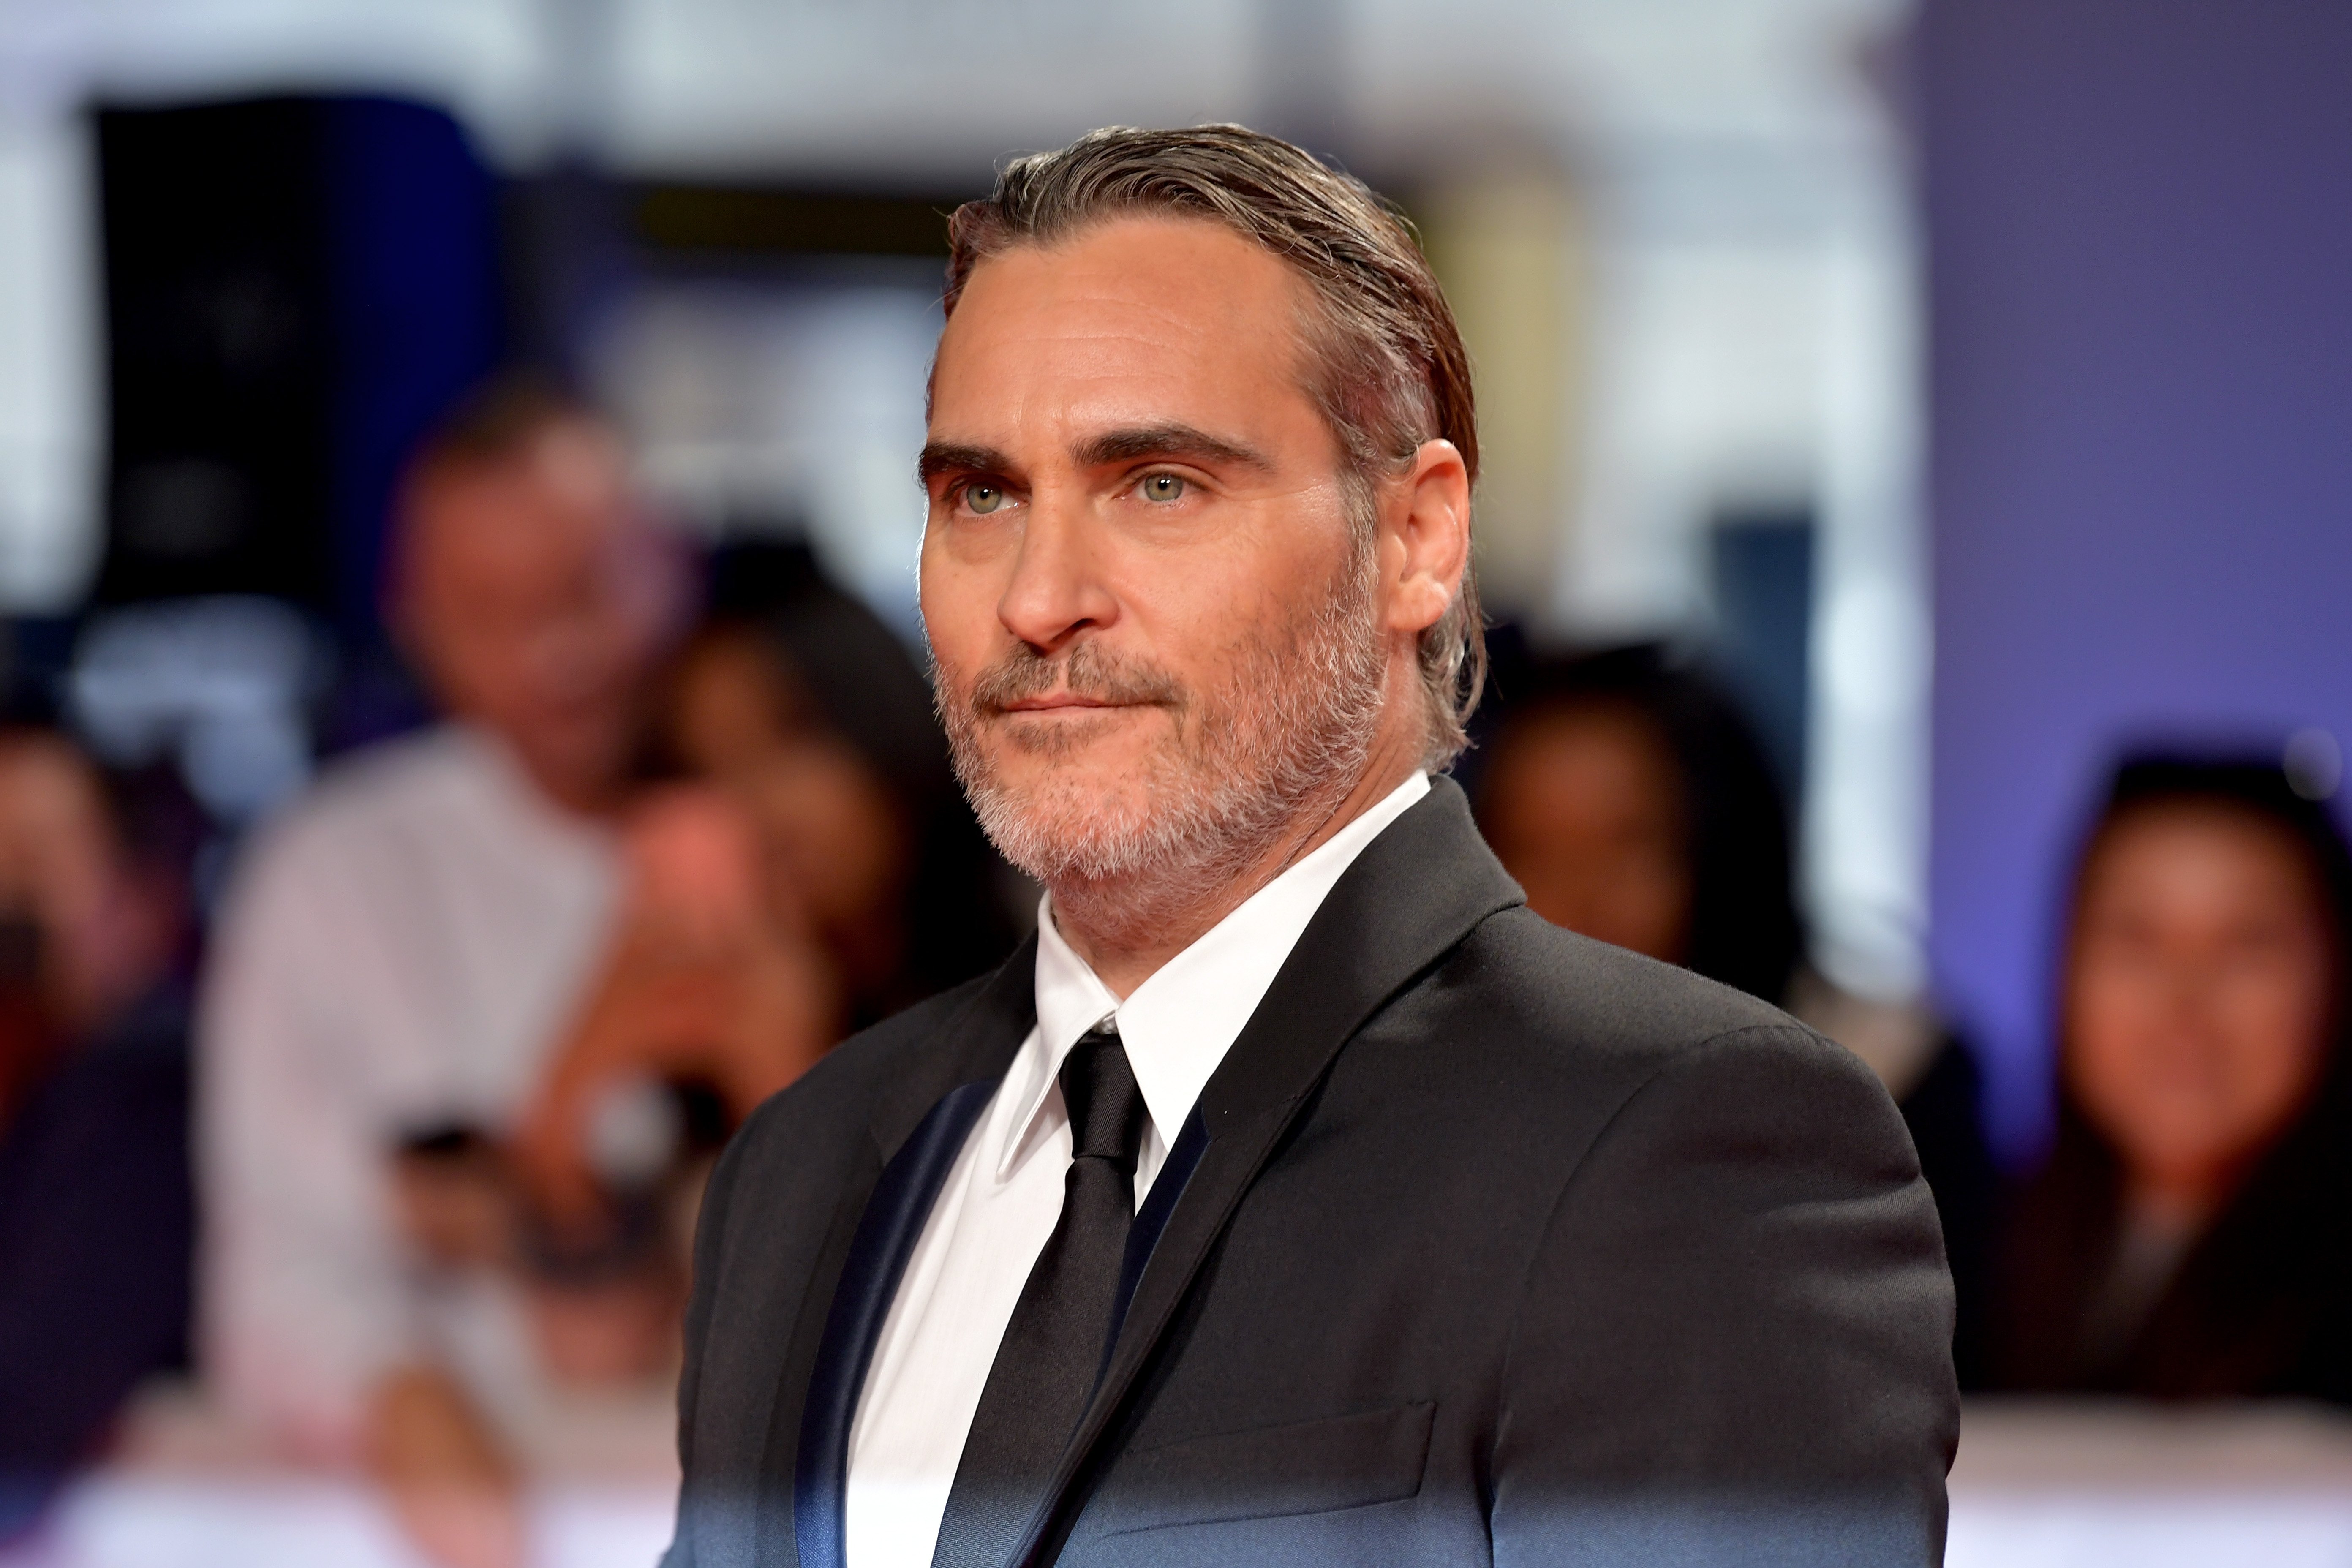 Joaquin Phoenix on September 09, 2019, in Toronto, Canada. | Photo: Getty Images